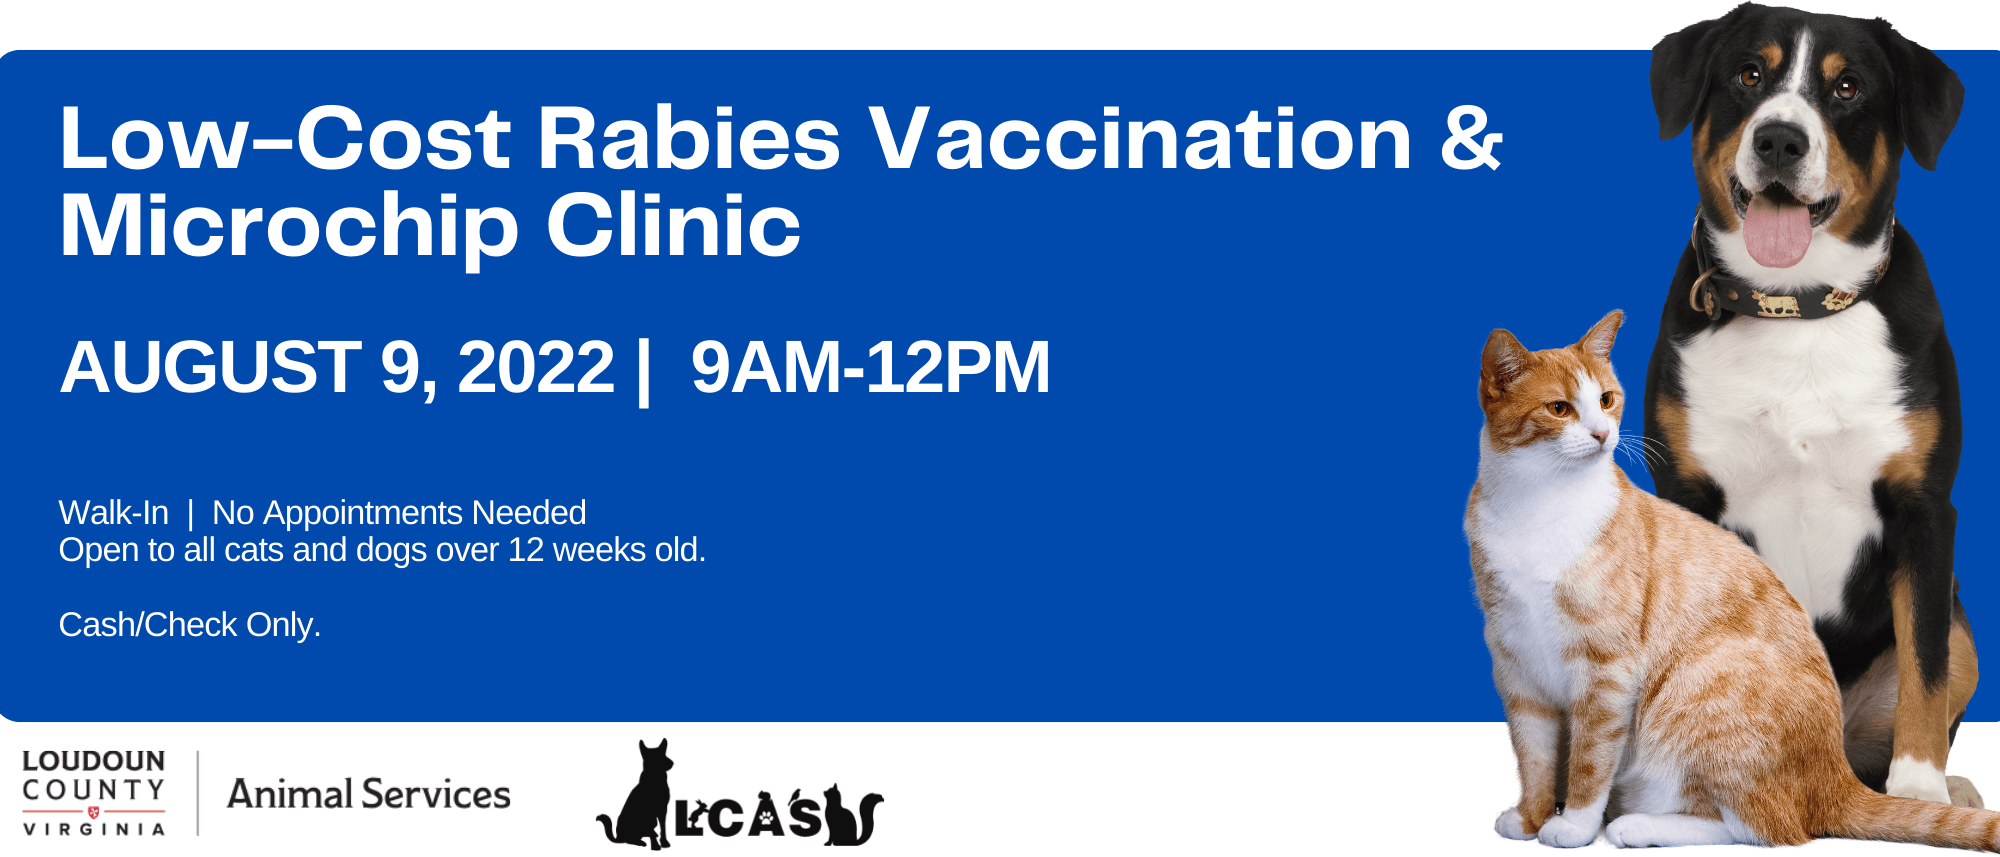 Graphic for Low-Cost Rabies Vaccination and Microchip Clinic-Aug 2022